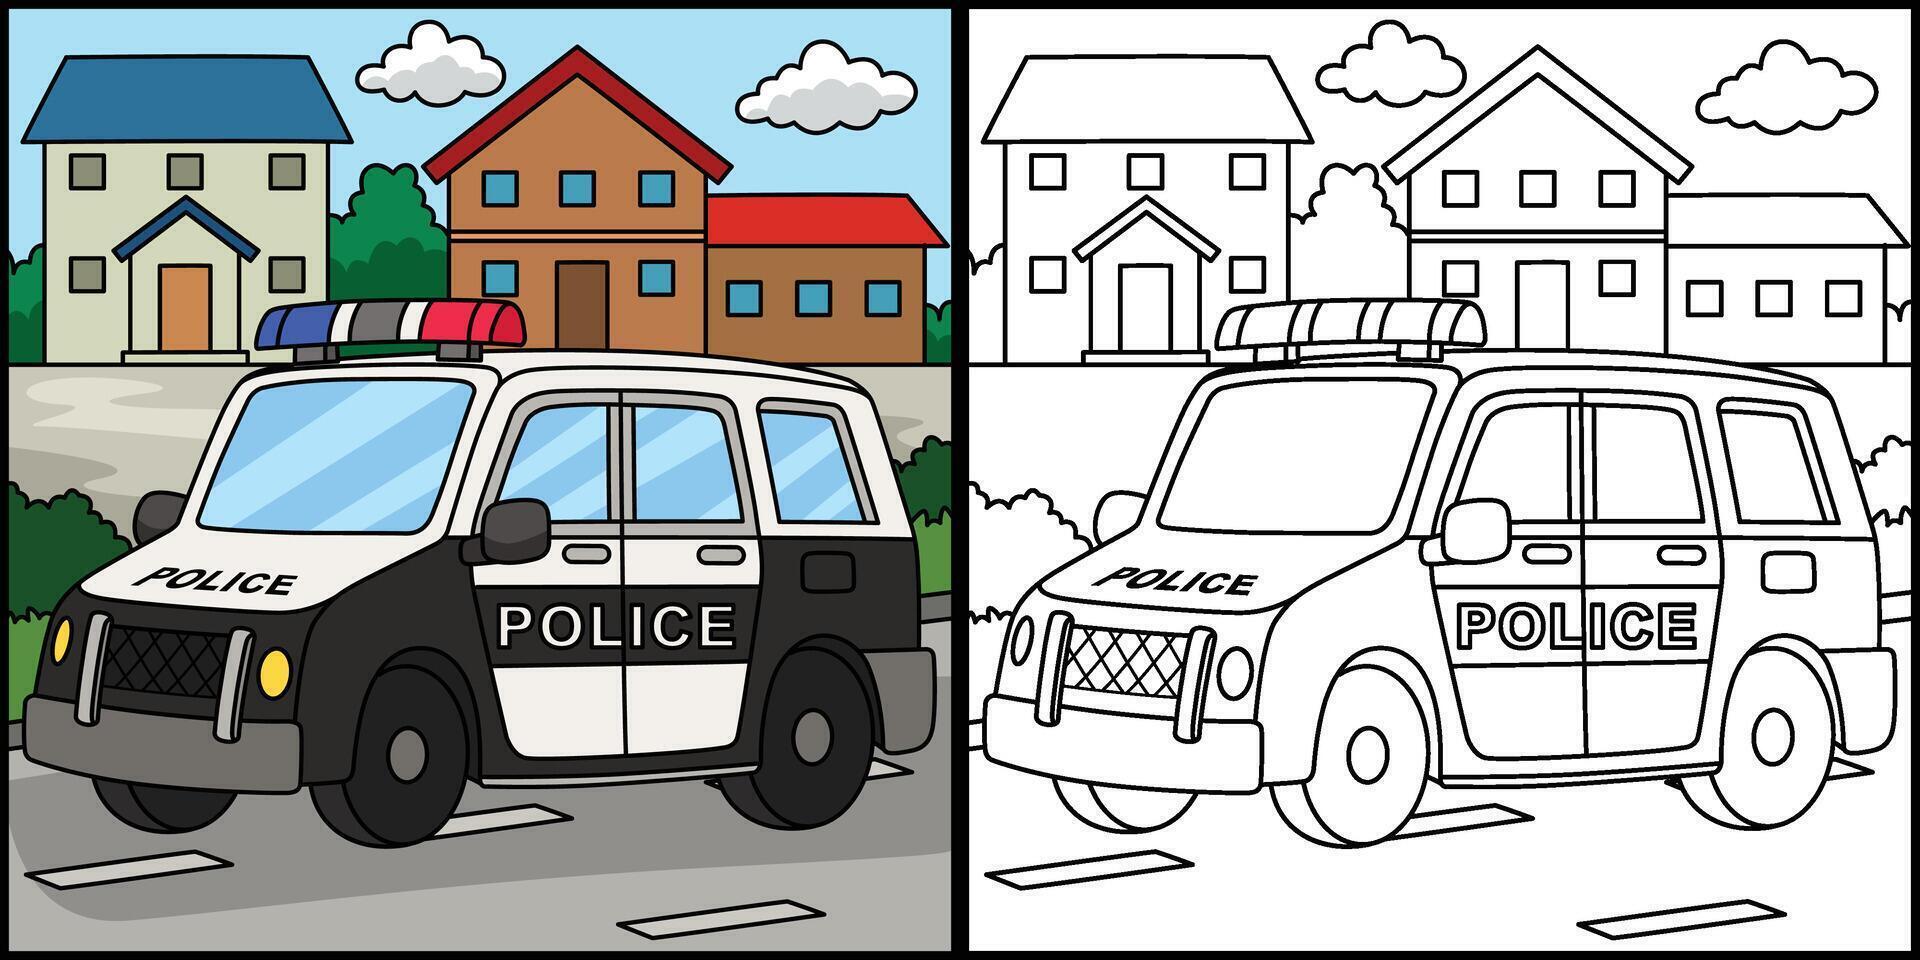 Police Car Coloring Page Colored Illustration vector